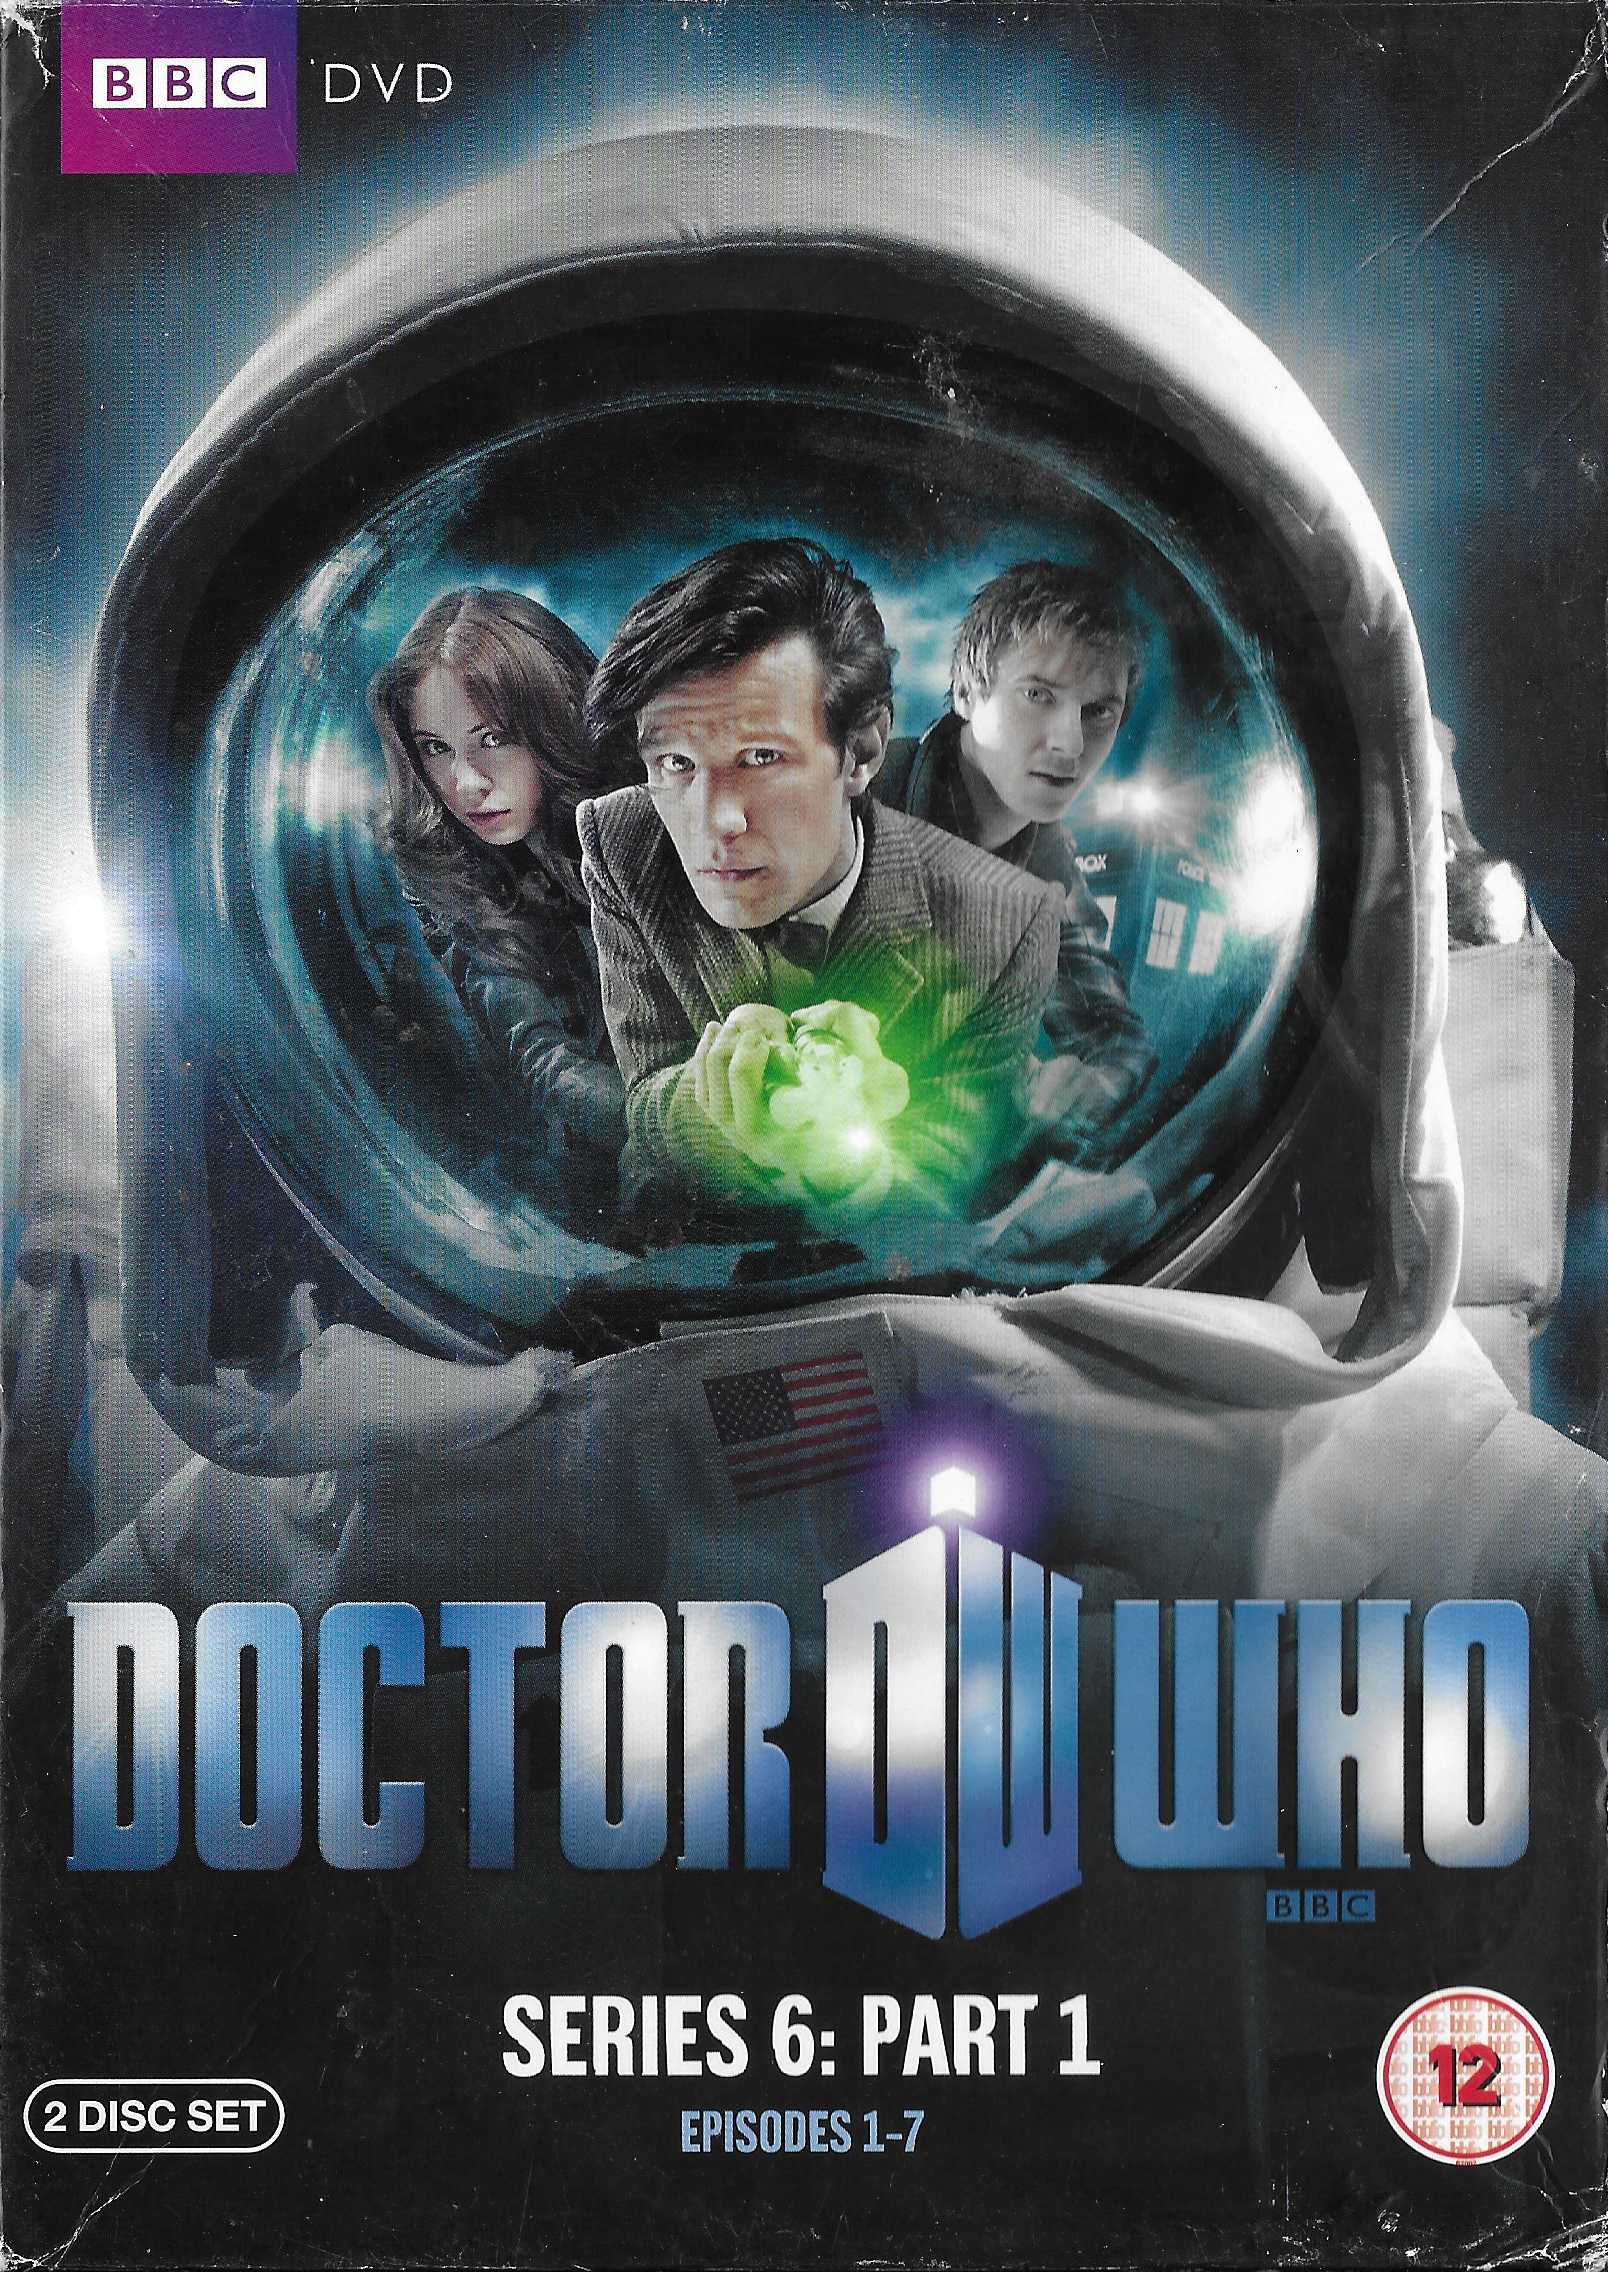 Picture of BBCDVD 3428 Doctor Who - Series 6, volume 1 by artist Steven Moffat / Stephen Thompson / Neil Gaiman / Matthew Graham from the BBC records and Tapes library